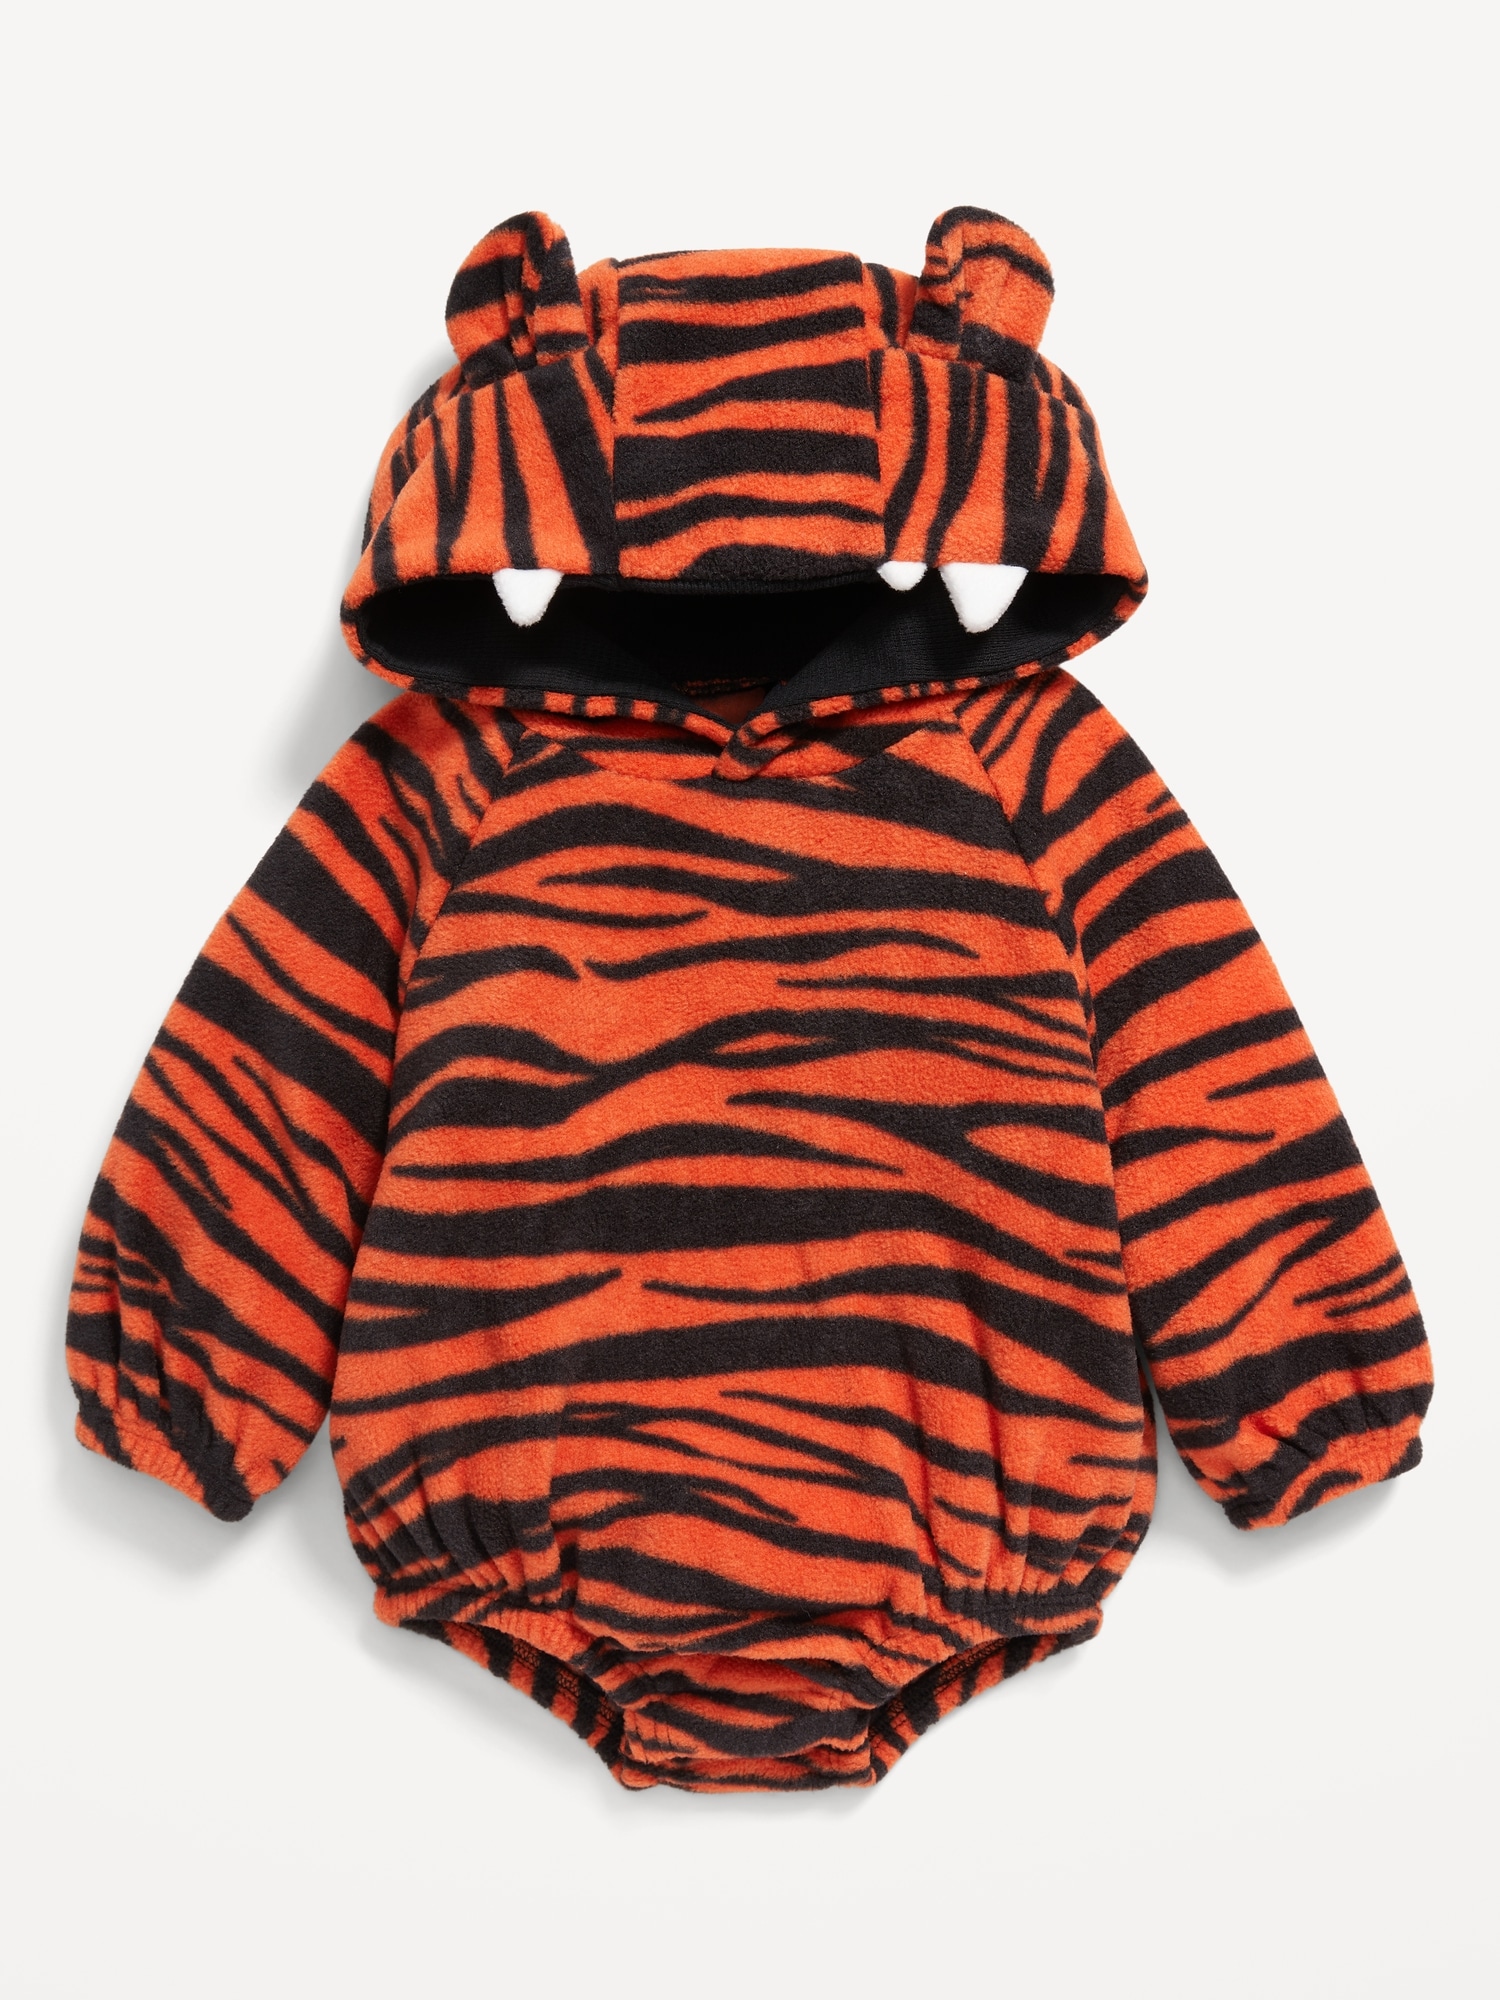 Matching Unisex Tiger Costume Hooded One-Piece Romper for Baby